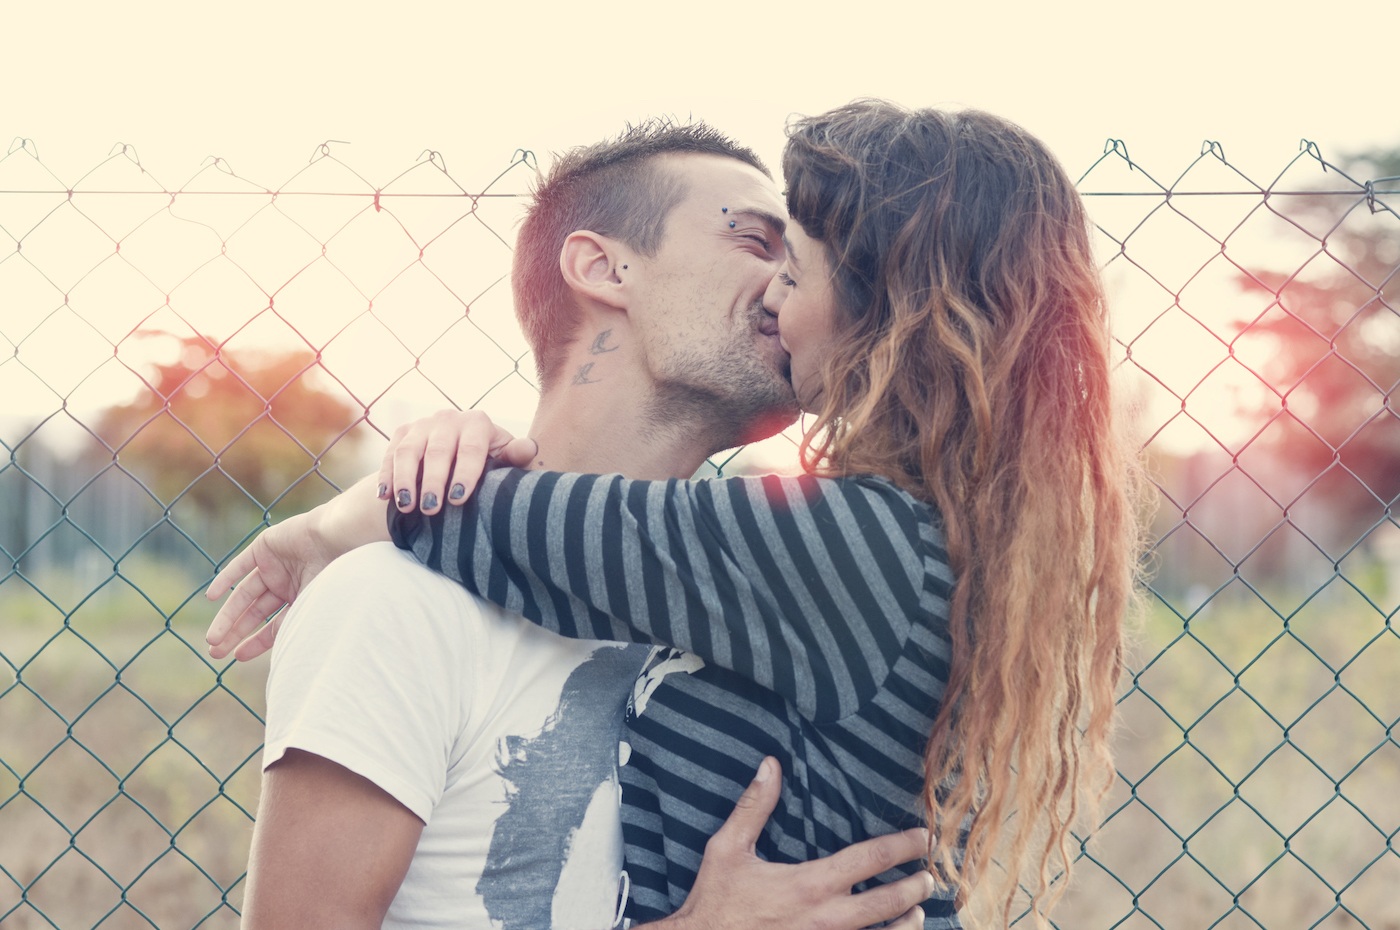 I want to fall in love and here's what relationship pros suggest